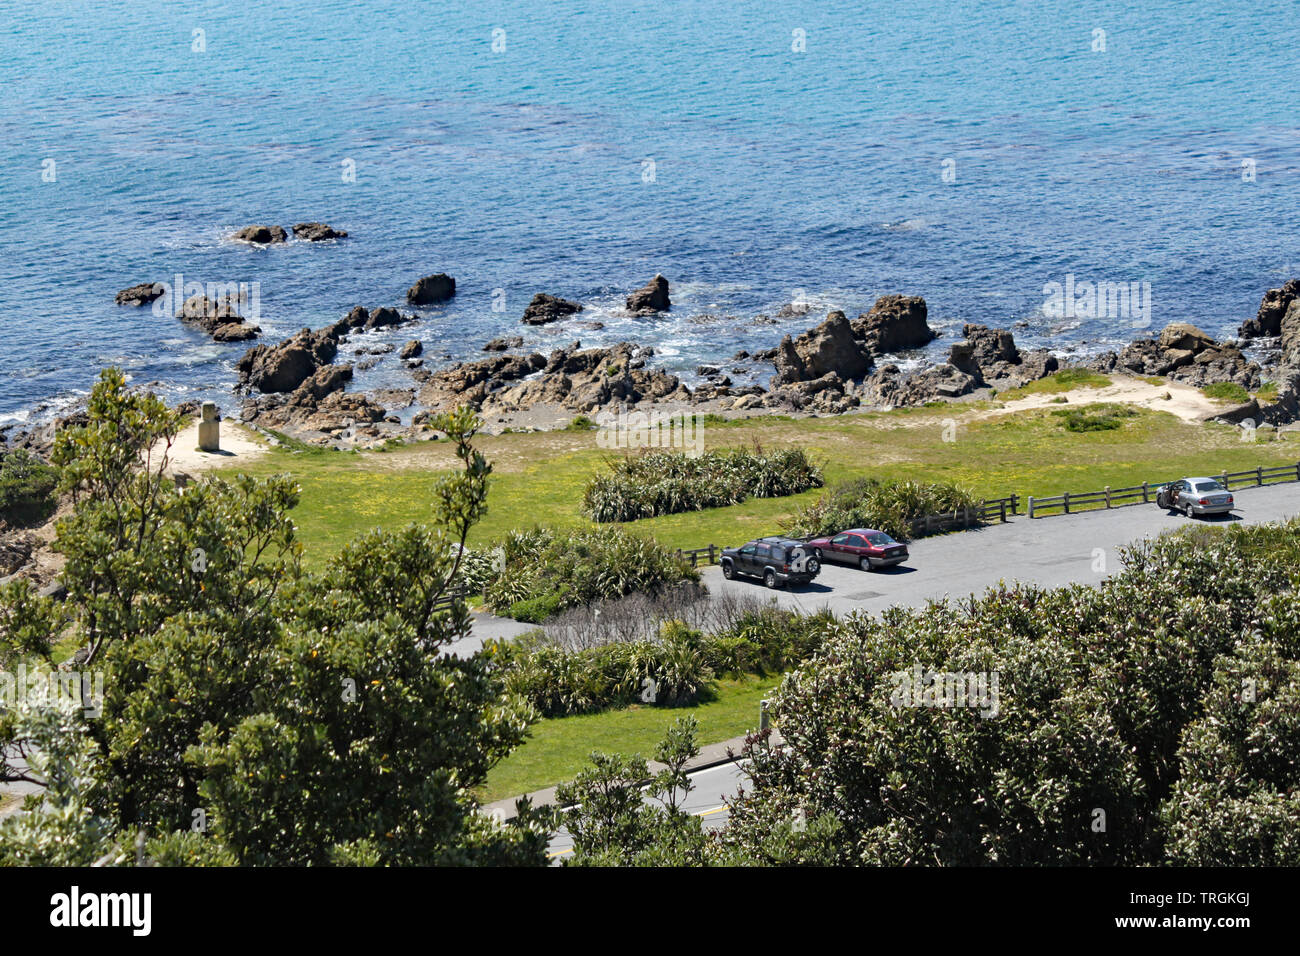 A view of the rocks and the Moai statue on the bank of Lyal Bay, Wellington, New Zealand. Stock Photo